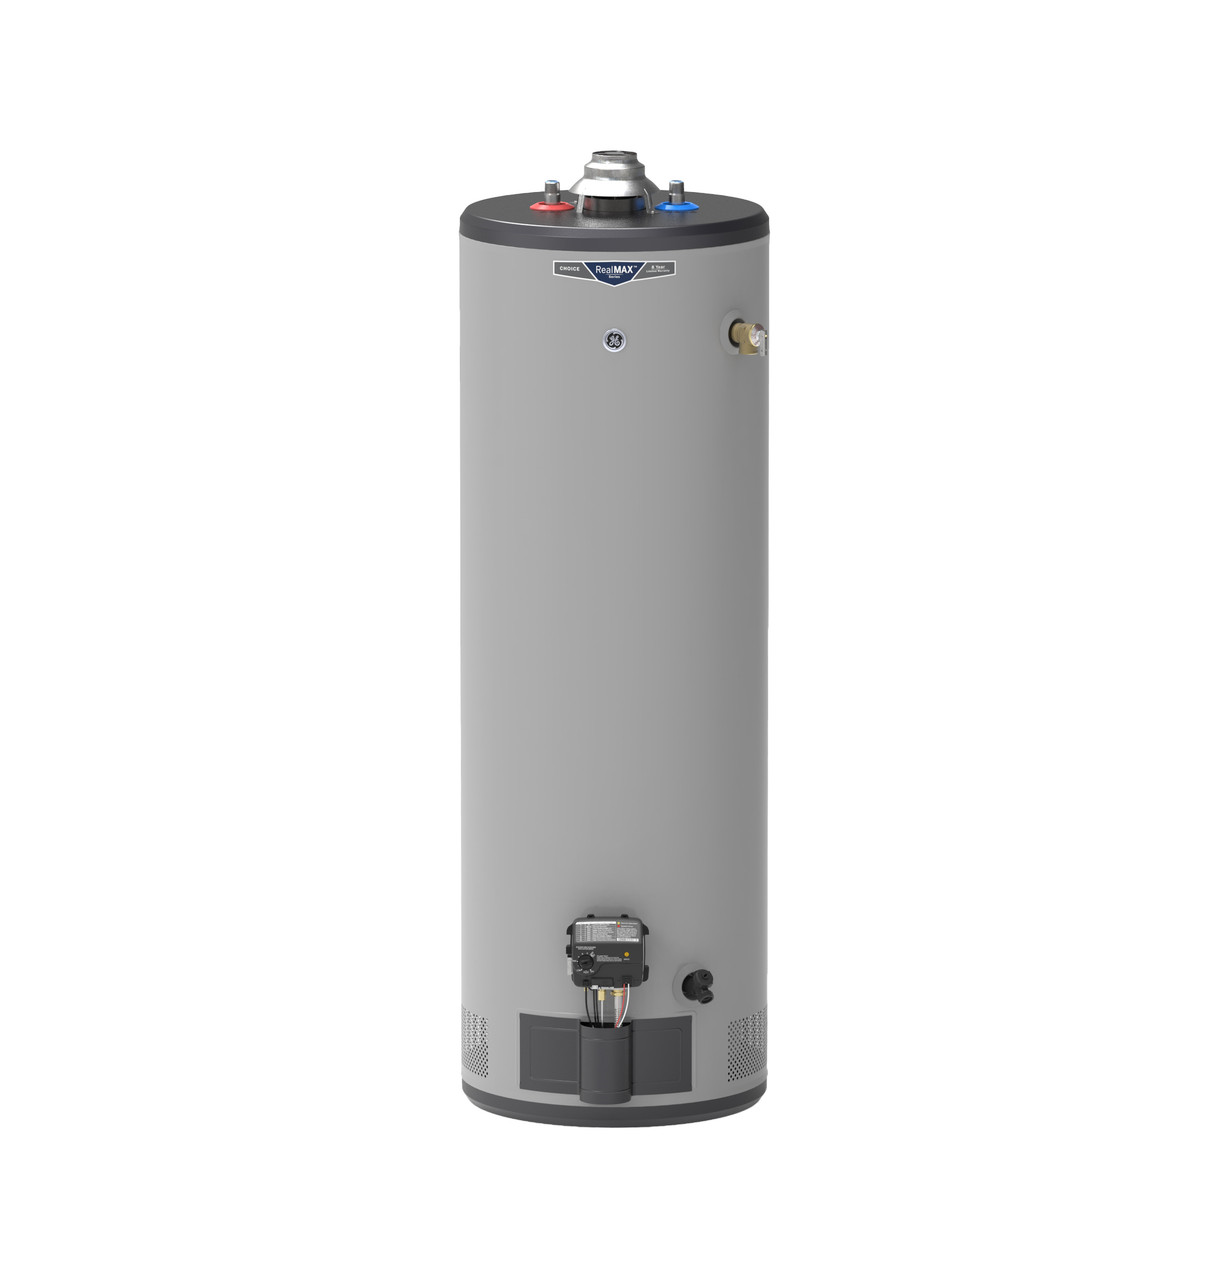 GG40T08BXR WATER HEATER 40 GALLON GAS 8YR - Water Heaters and Parts